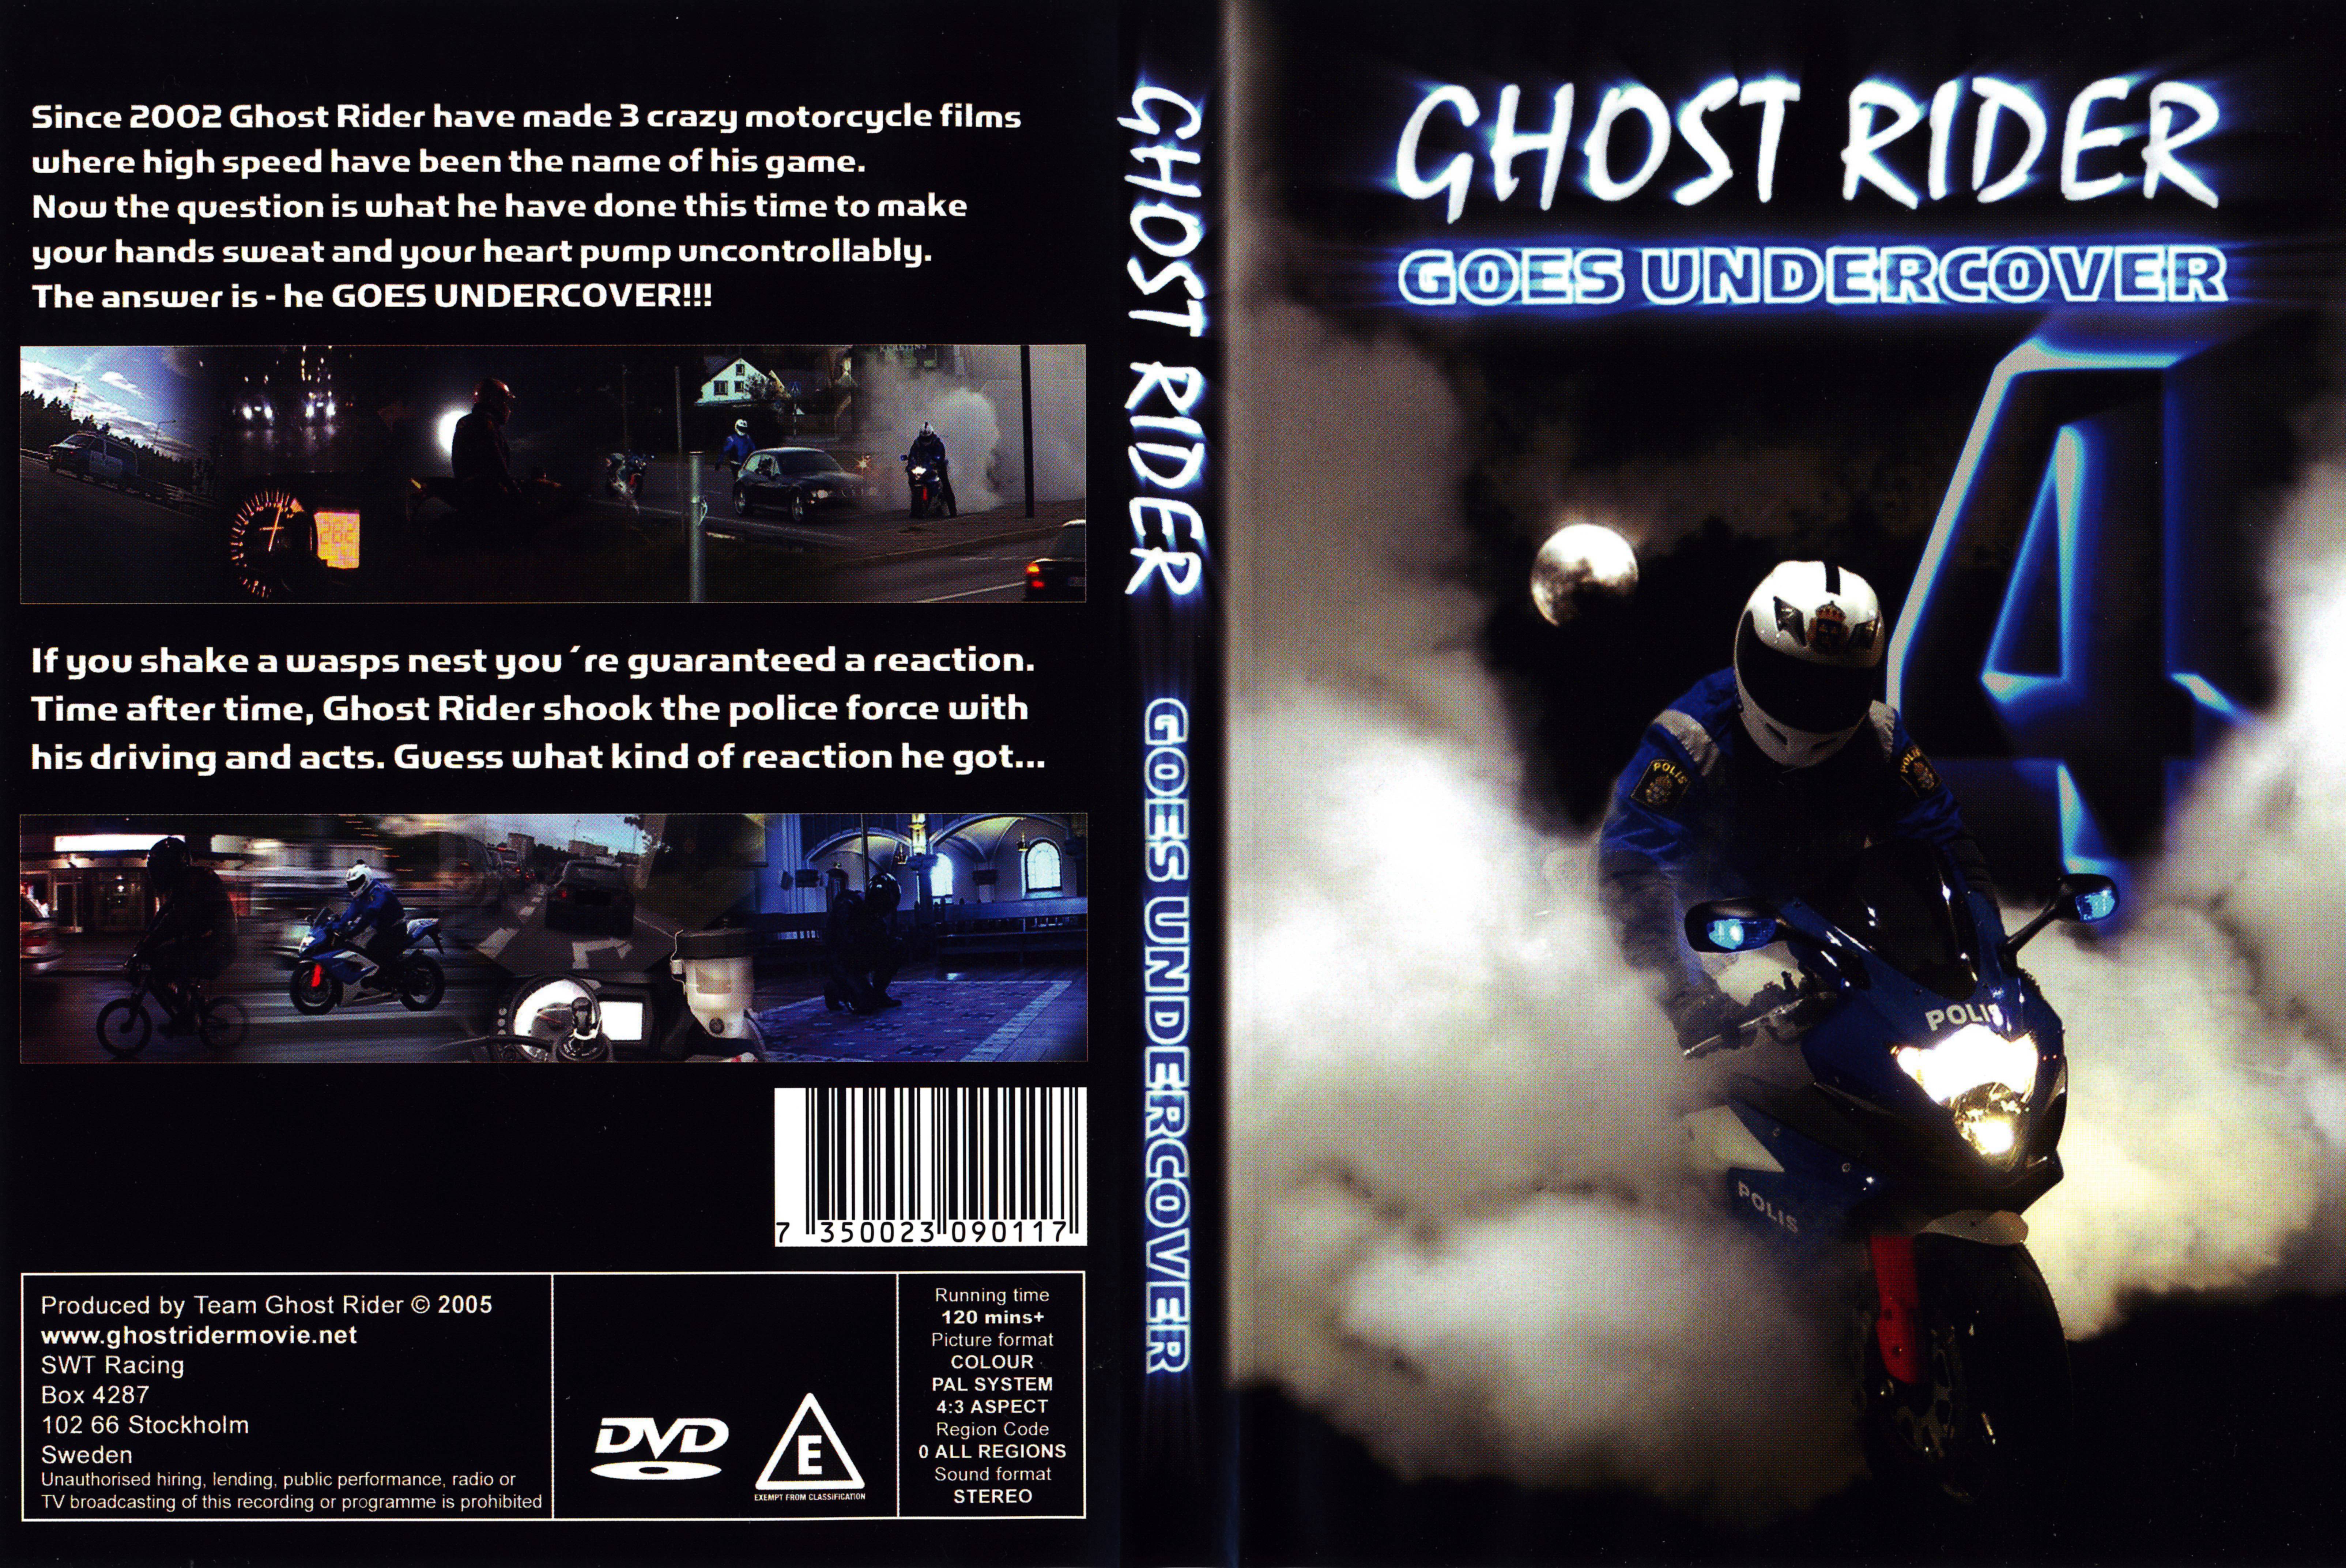 Jaquette DVD Ghost rider 4 Goes undercover